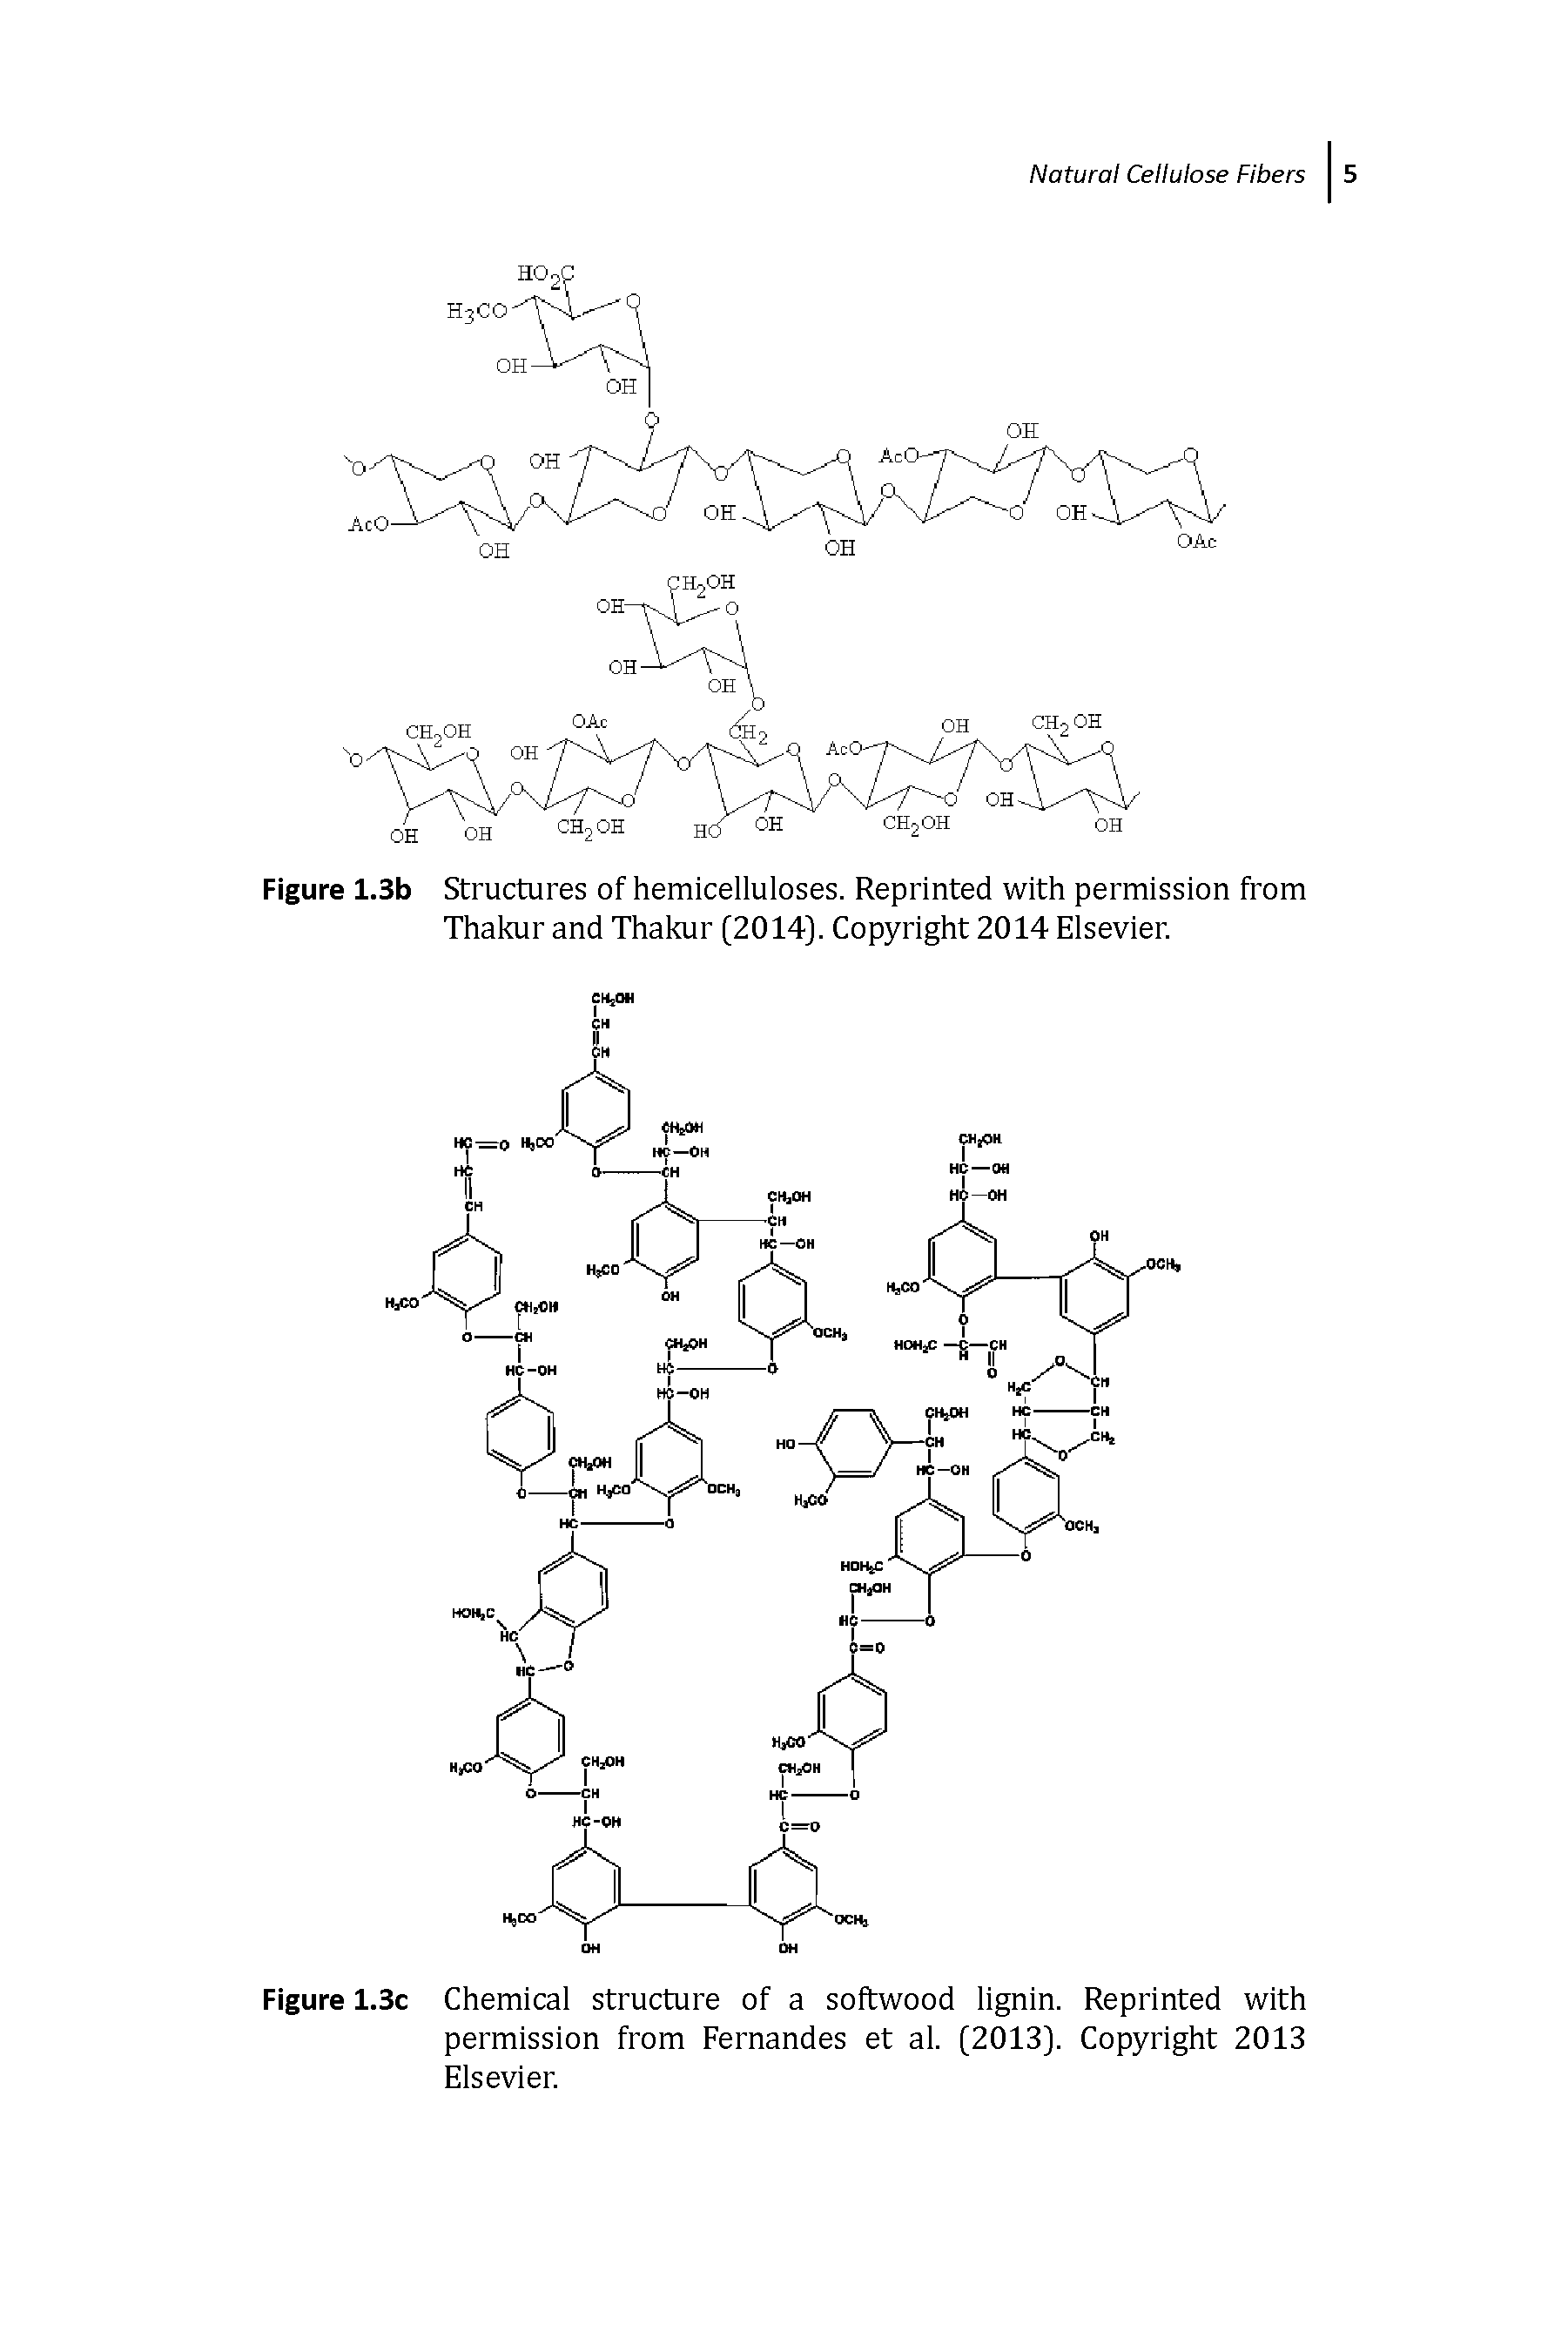 Figure 1.3b Structures of hemicelluloses. Reprinted with permission from Thakur and Thakur [2014]. Copyright 2014 Eisevier.